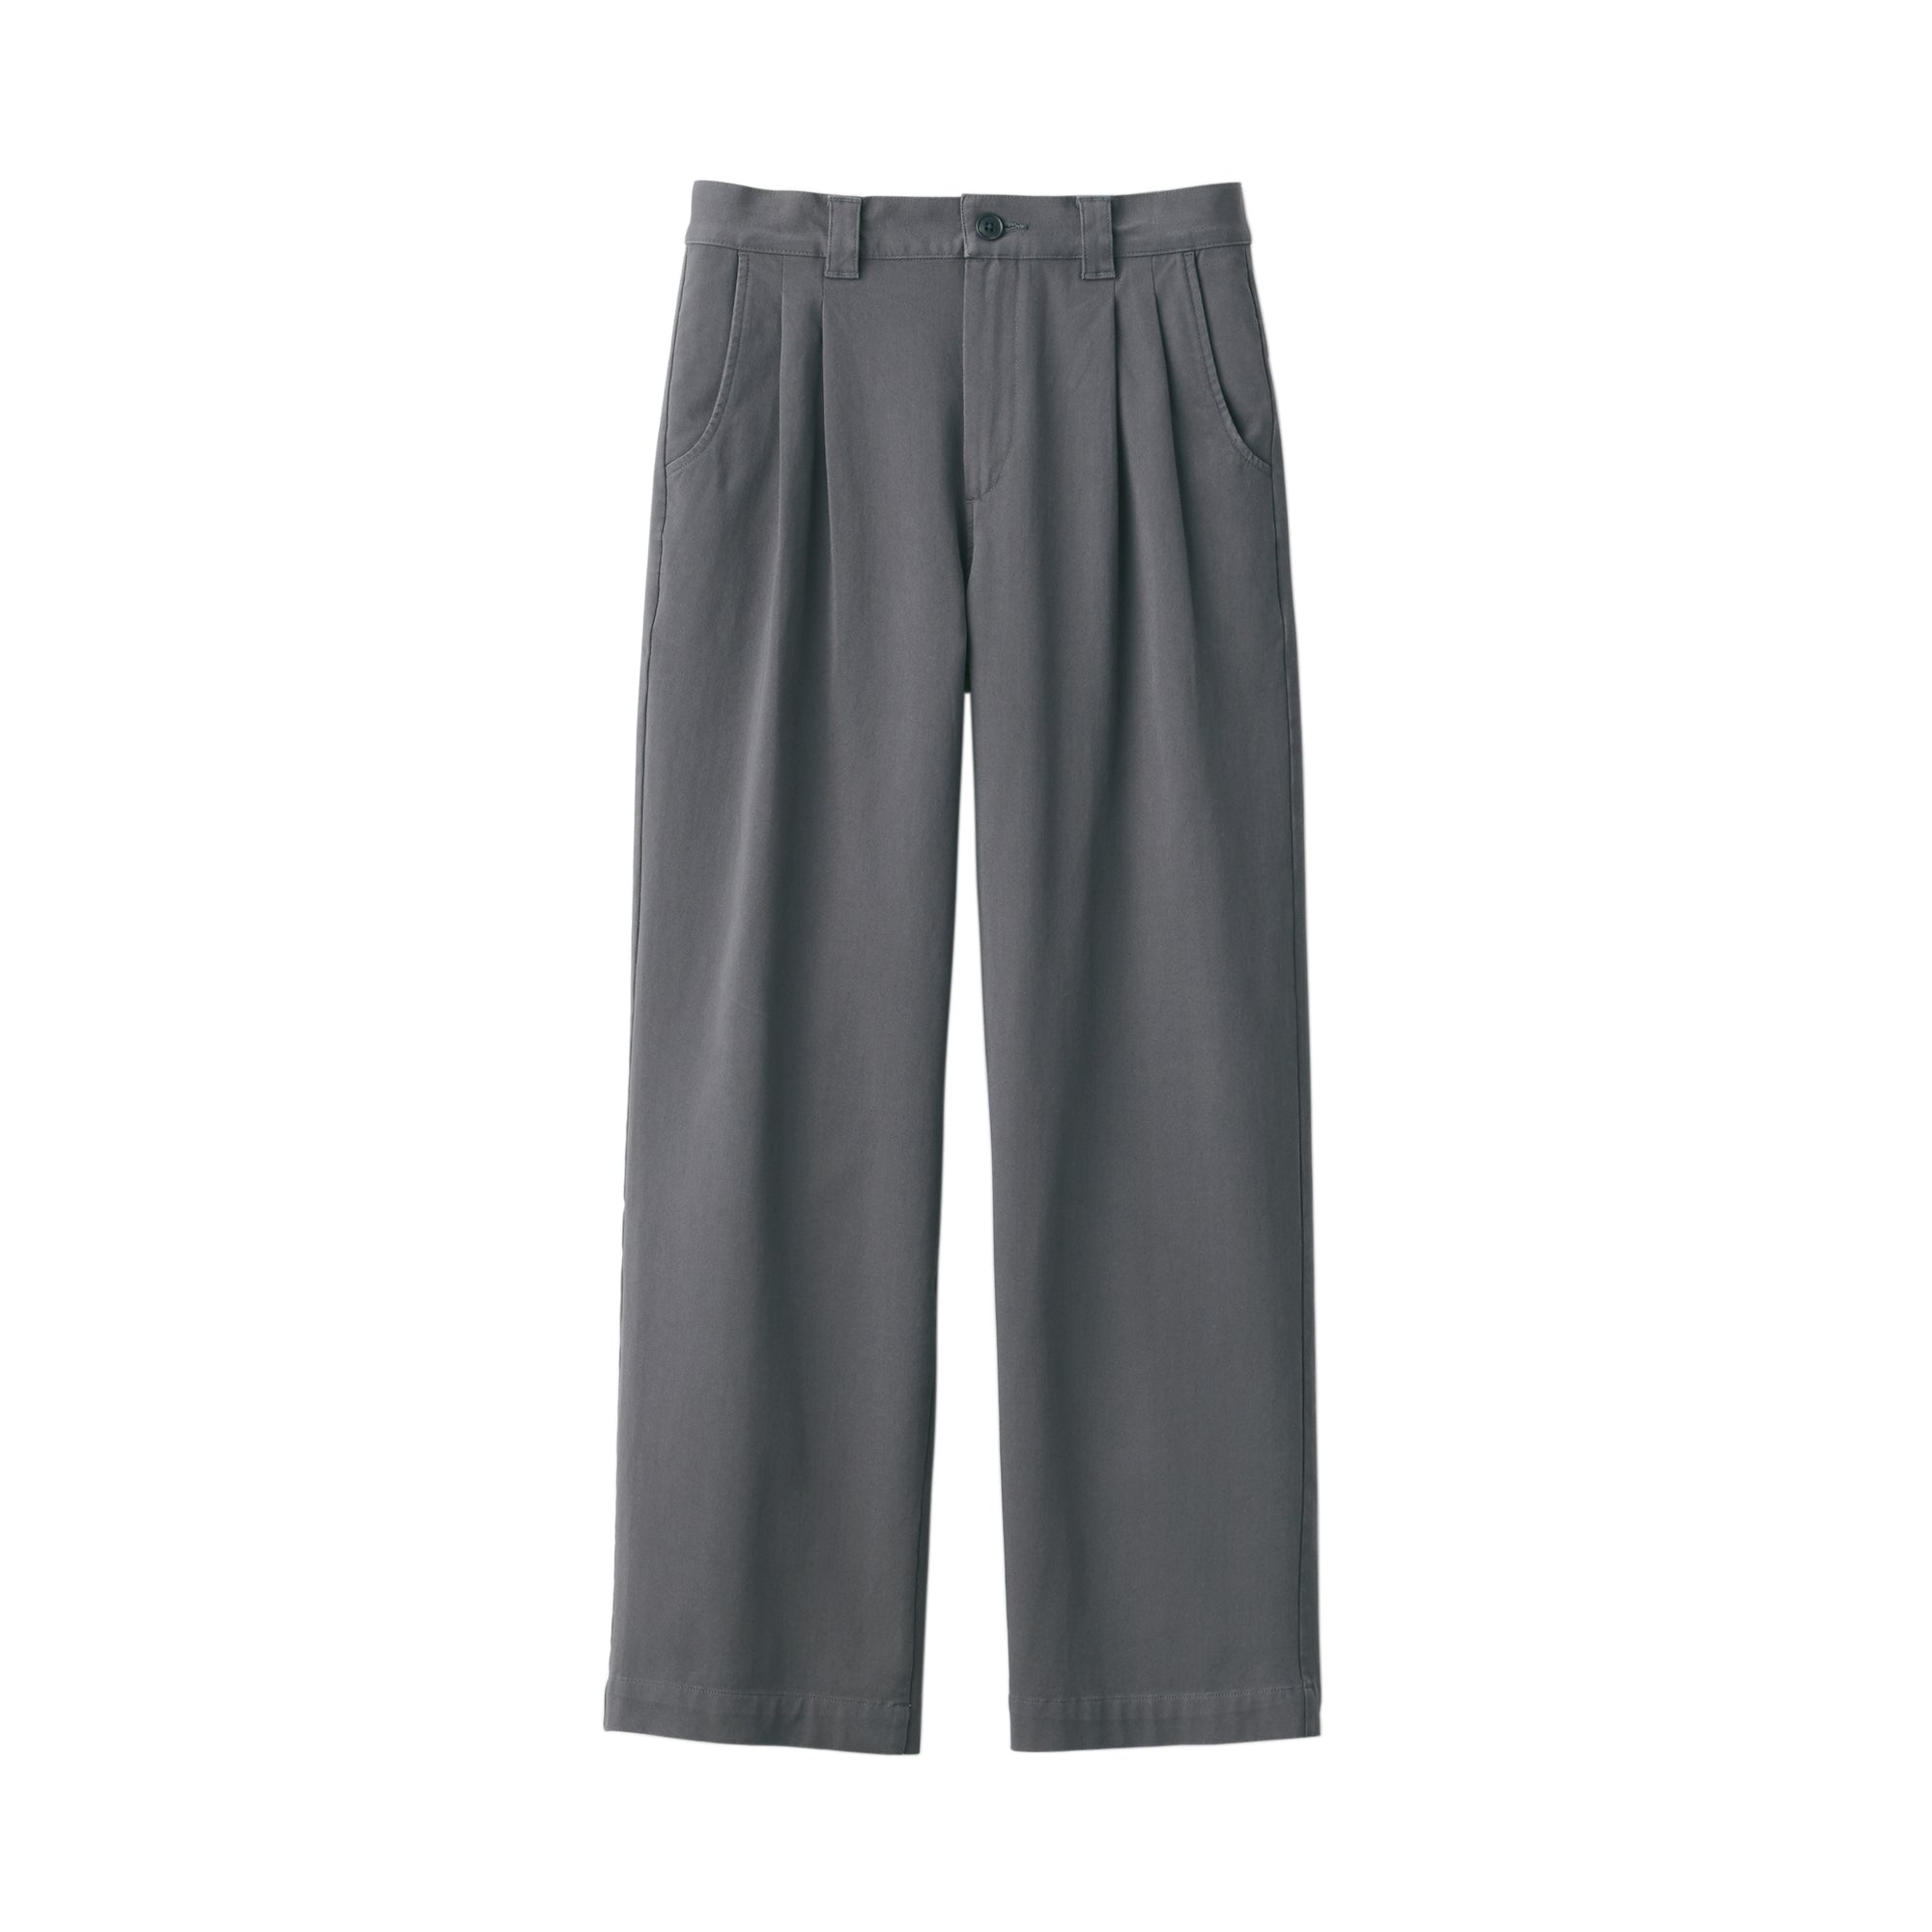 Women's 4-Way Stretch Chino Darted Wide Pants